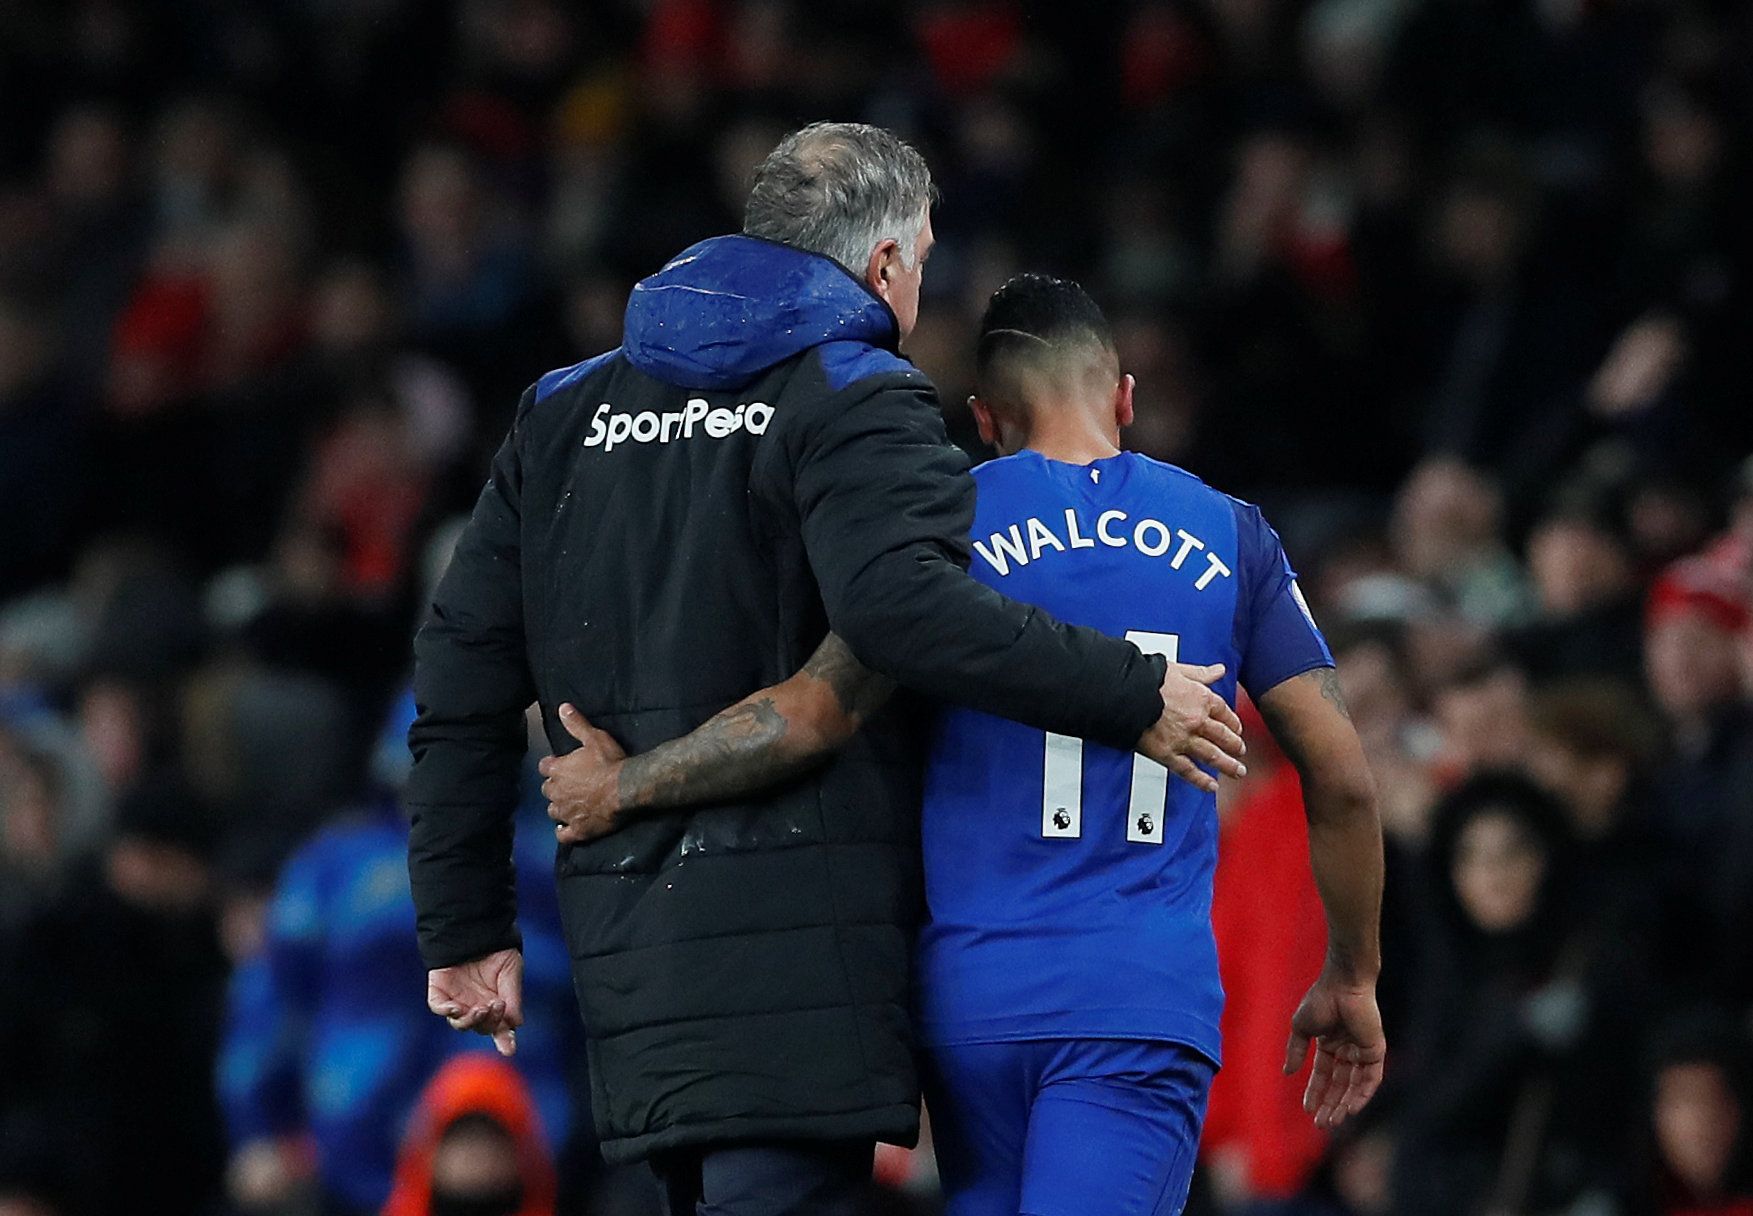 Soccer Football - Premier League - Arsenal vs Everton - Emirates Stadium, London, Britain - February 3, 2018   Everton's Theo Walcott with manager Sam Allardyce after being substituted off for Dominic Calvert-Lewin    REUTERS/David Klein    EDITORIAL USE ONLY. No use with unauthorized audio, video, data, fixture lists, club/league logos or 